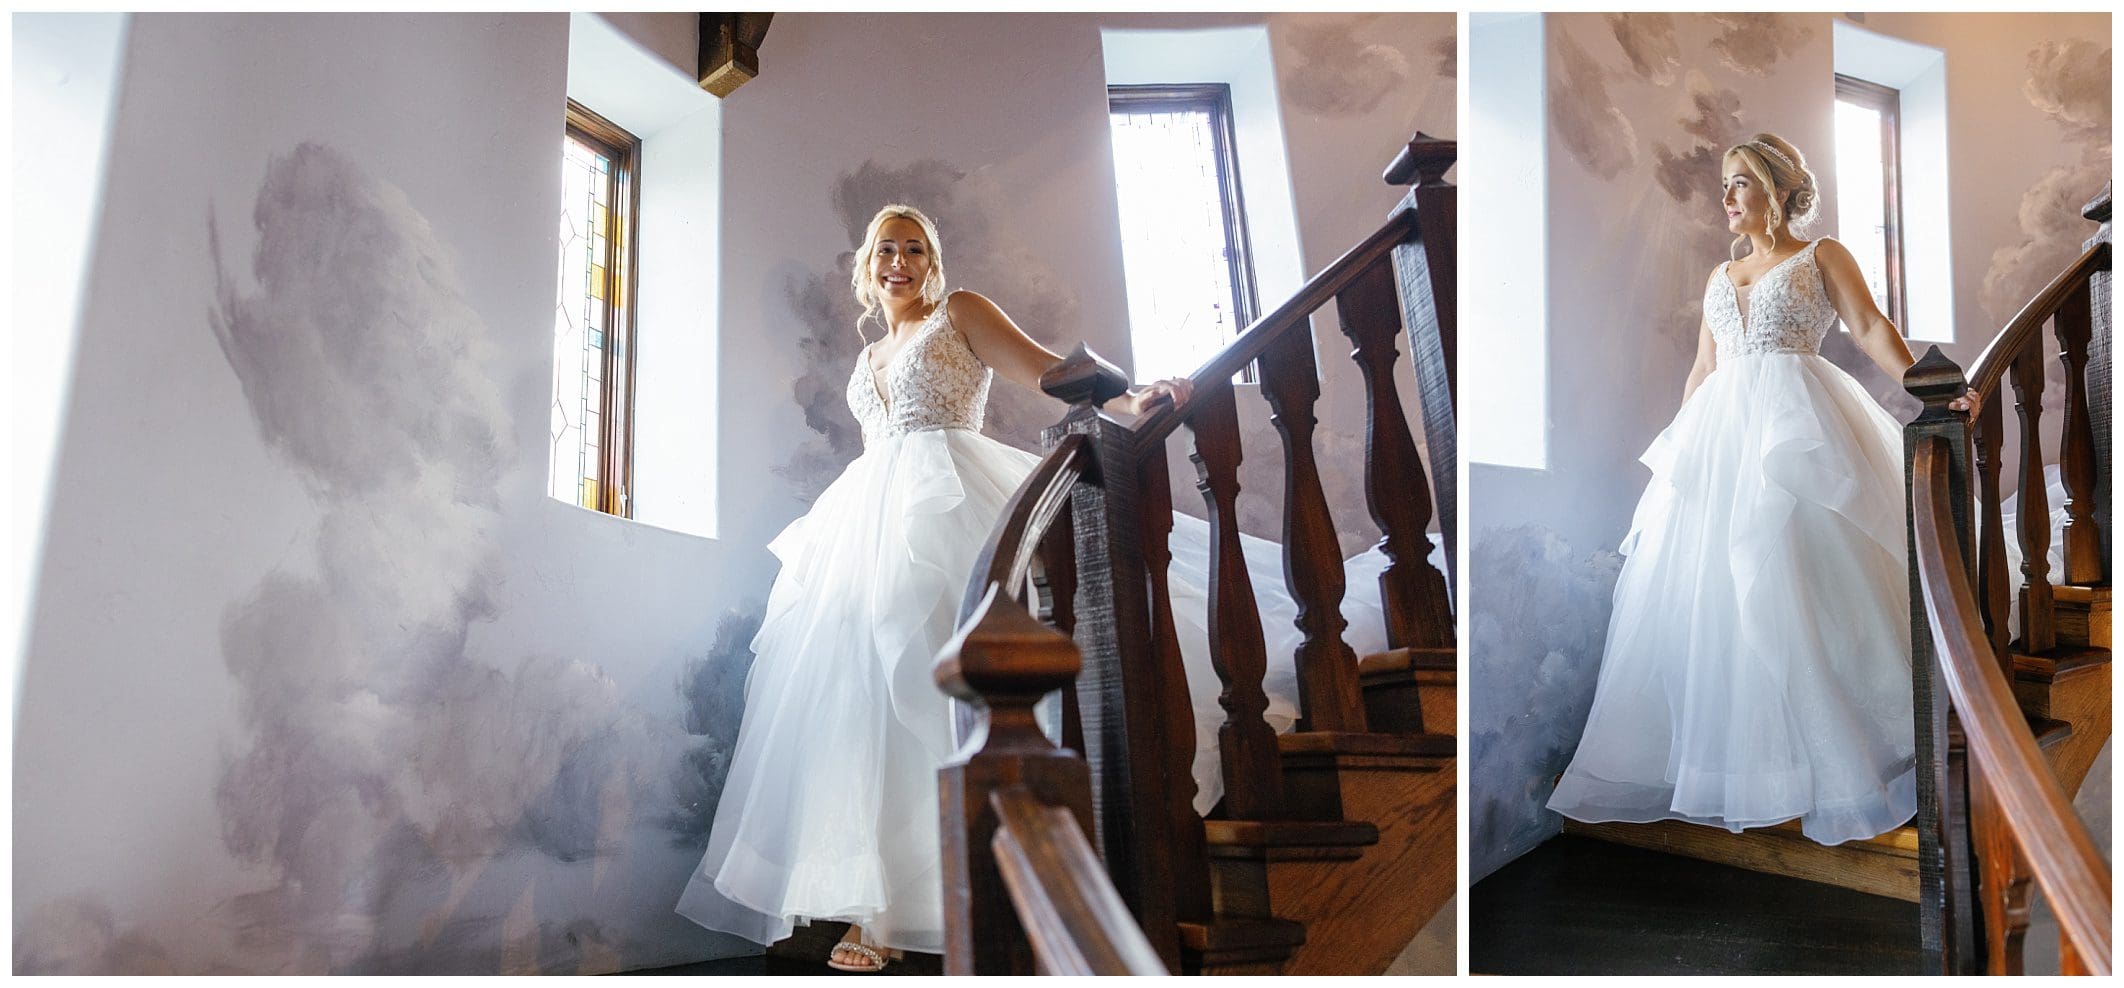 A bride in a wedding dress standing on a staircase.